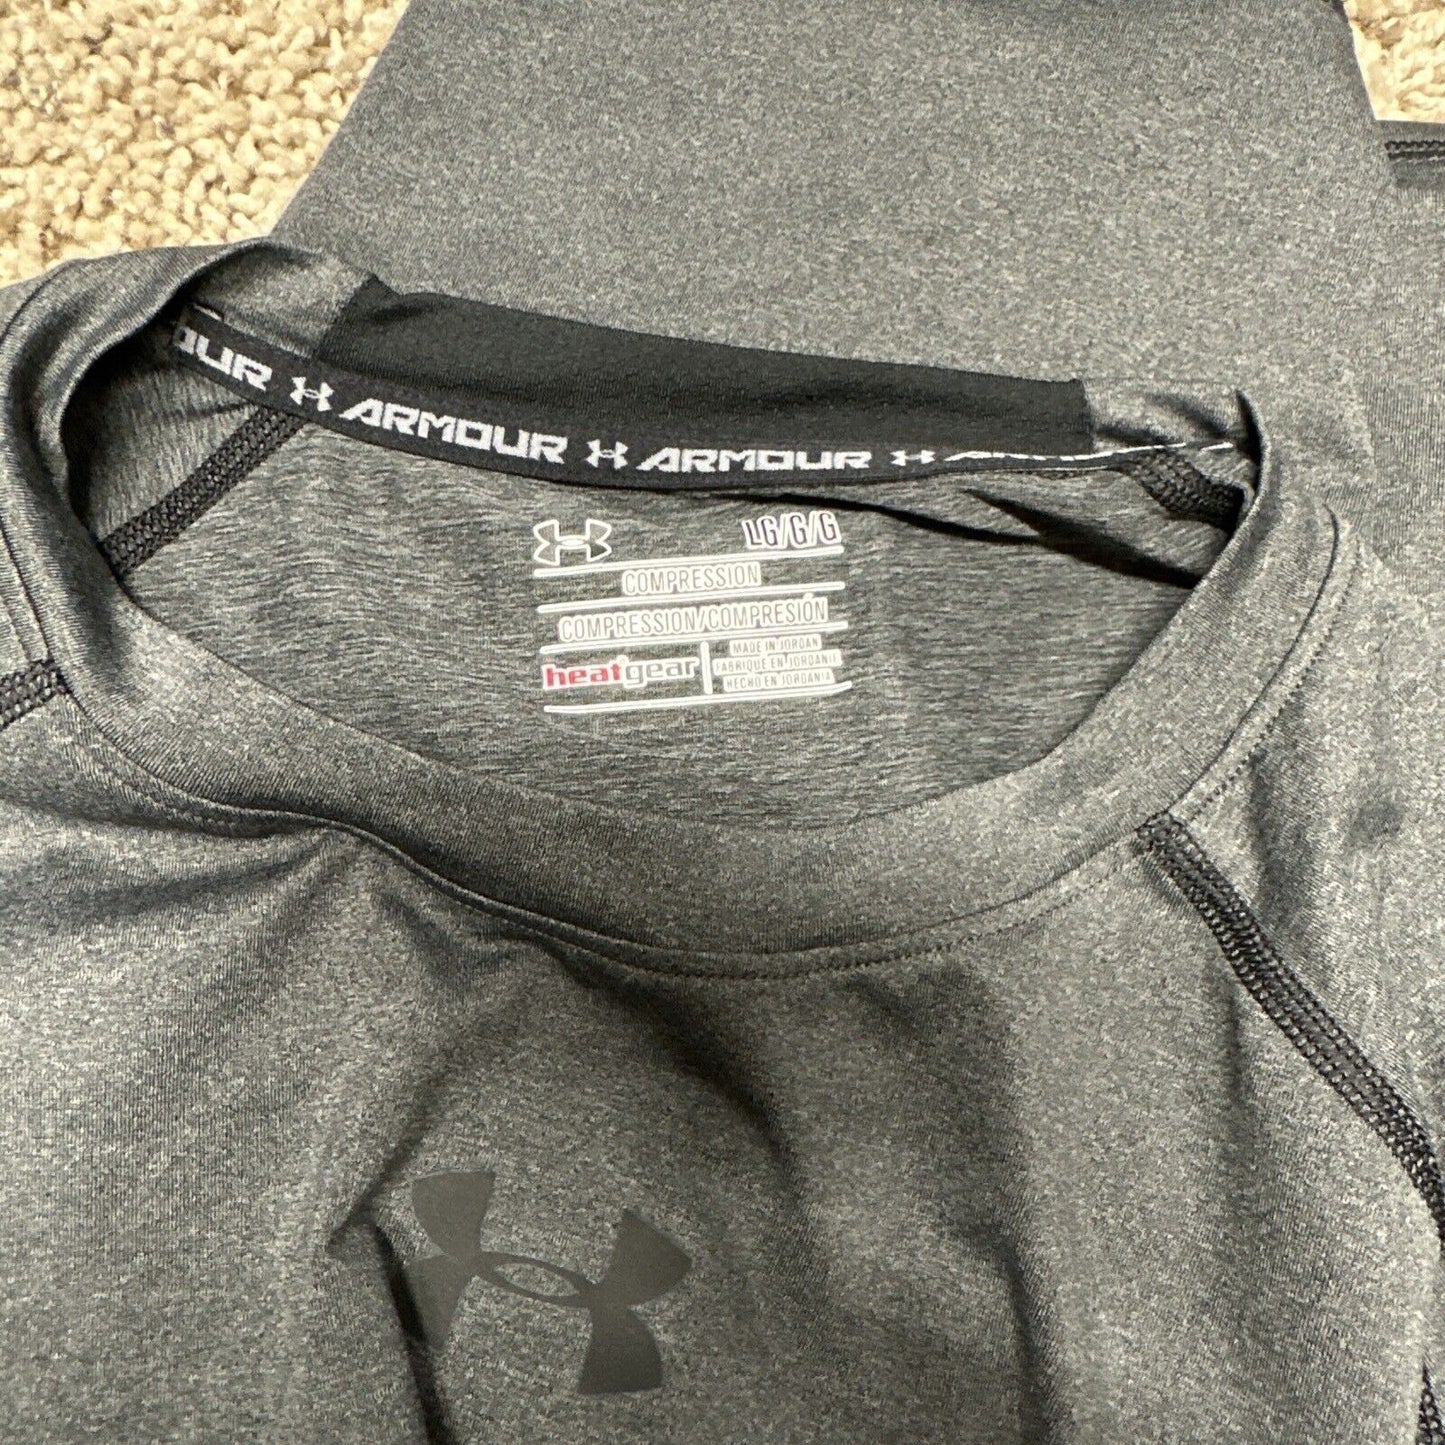 Men’s Large Gray Under Armour Compression Long Sleeve Pullover Shirt Athletic